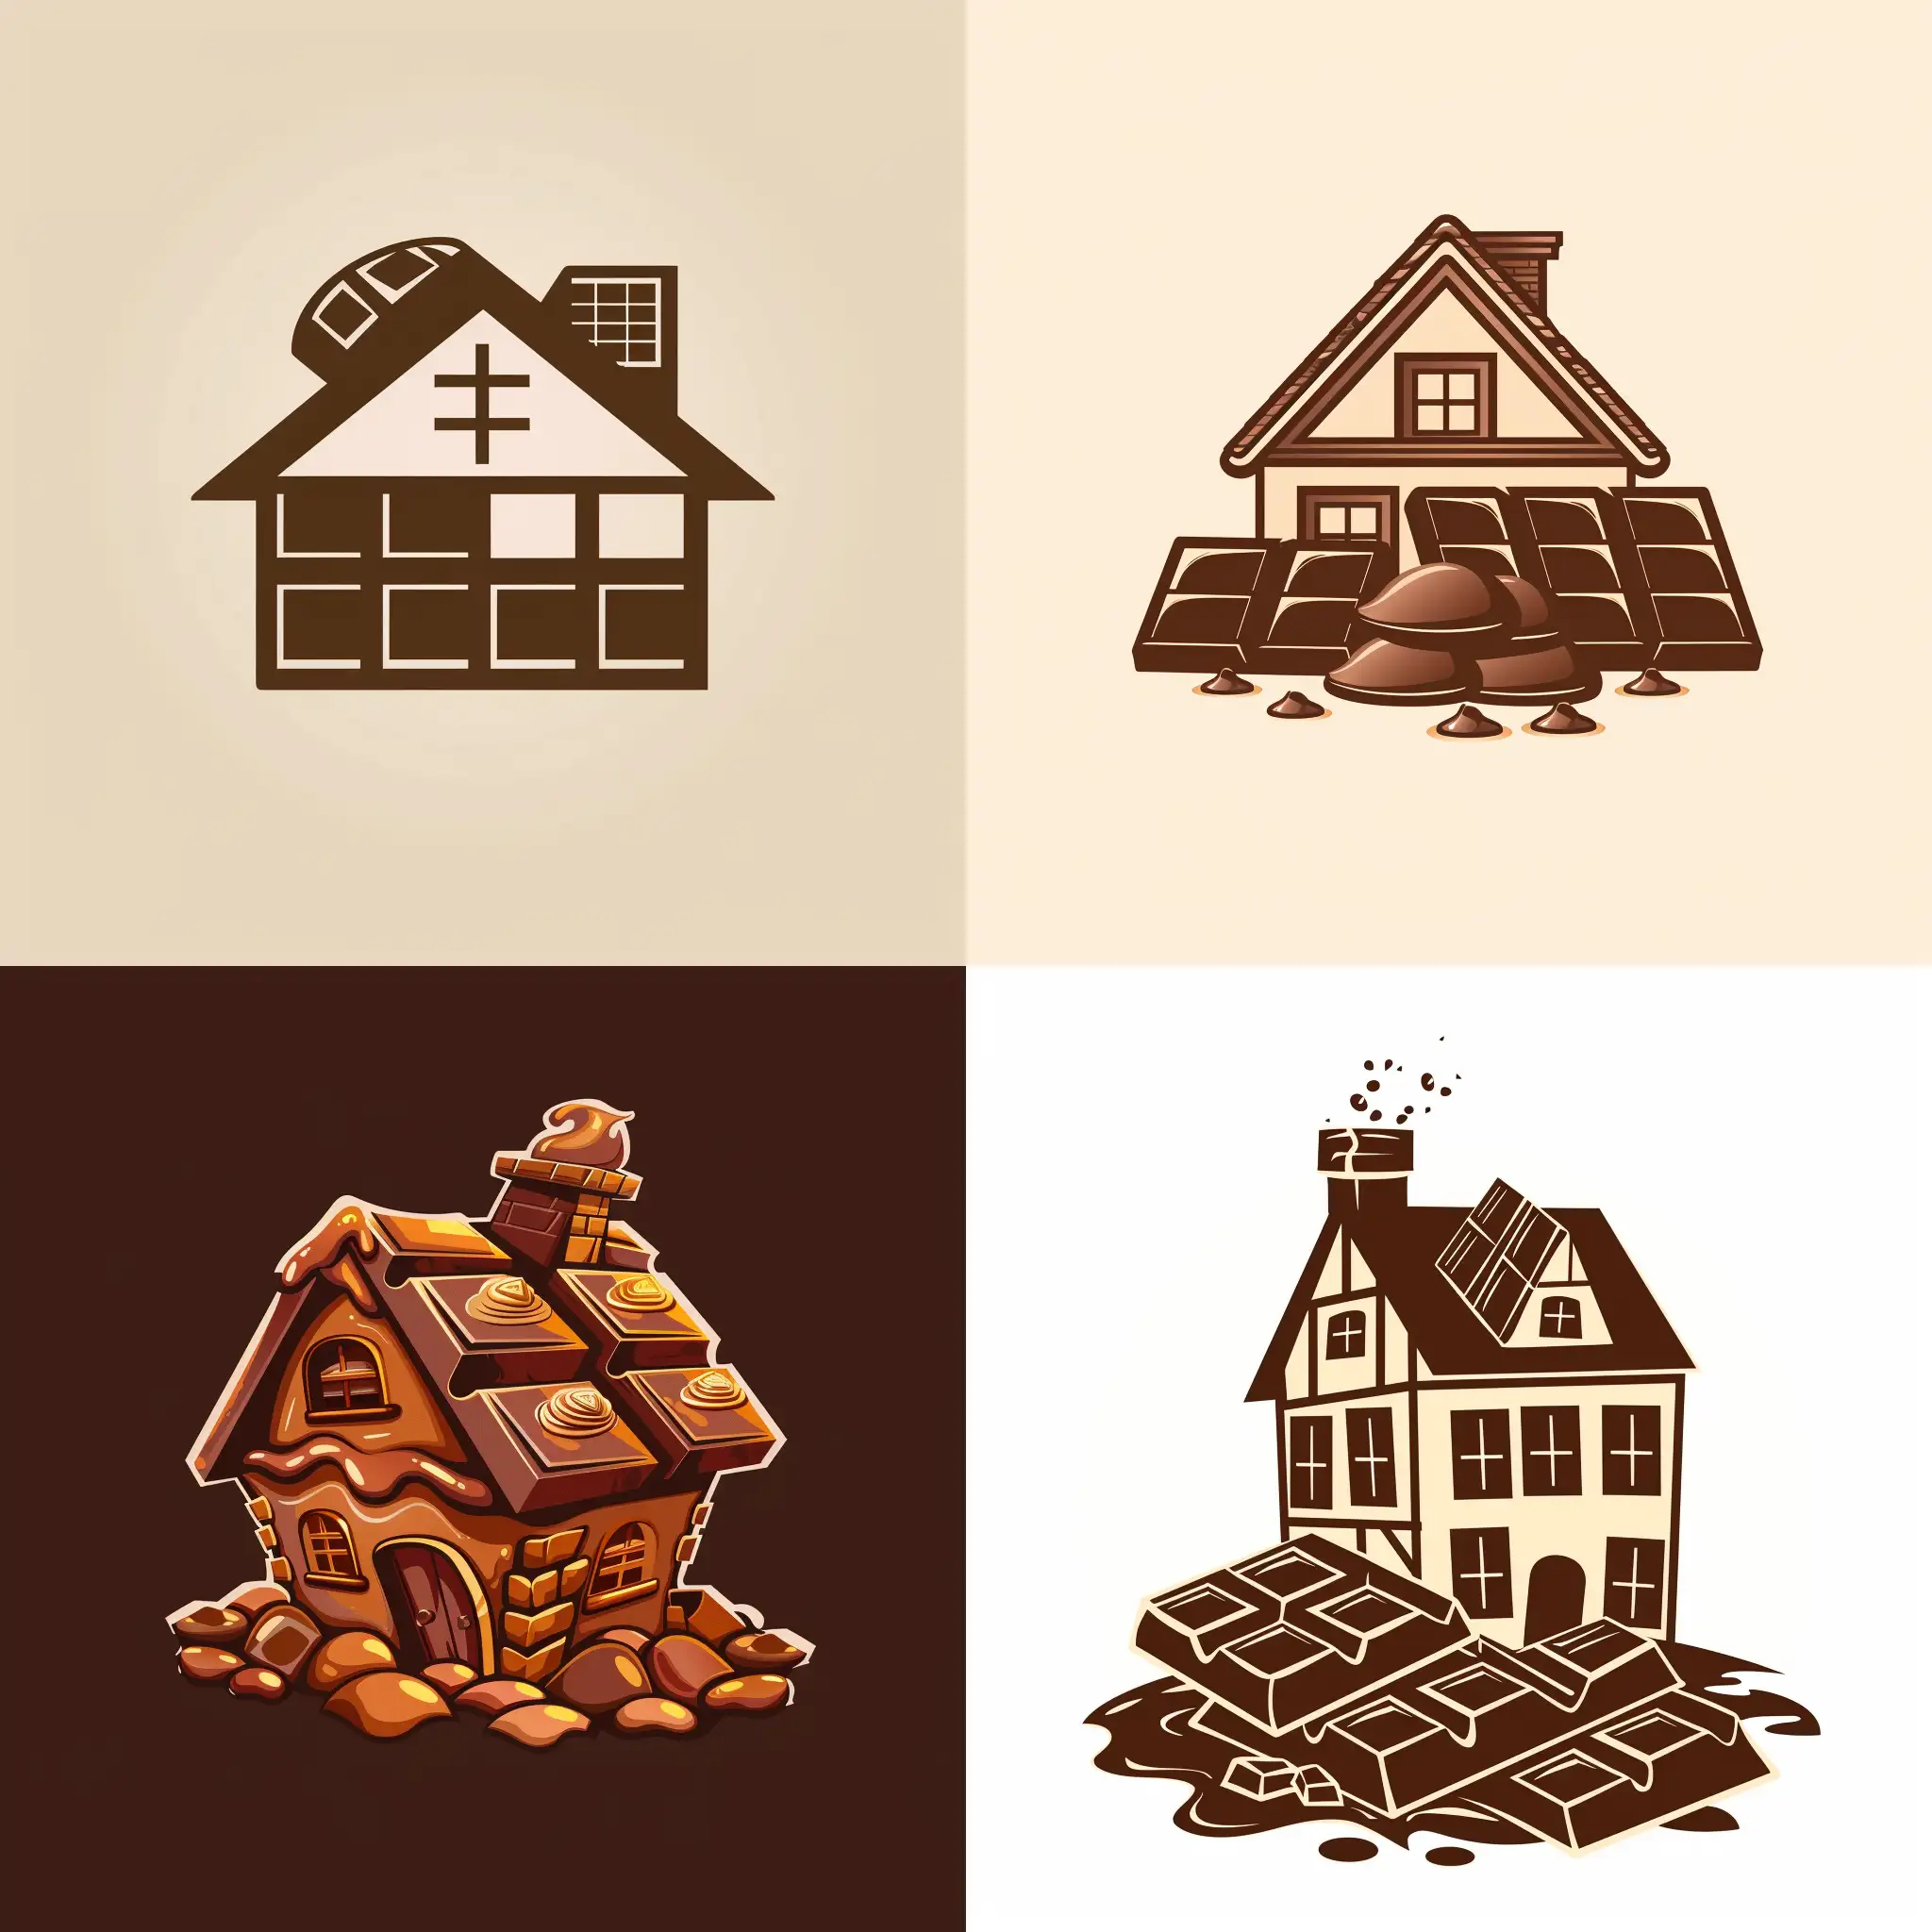 Vector logo of a confectionery, possibly in the form of chocolate bars or a house of chocolate